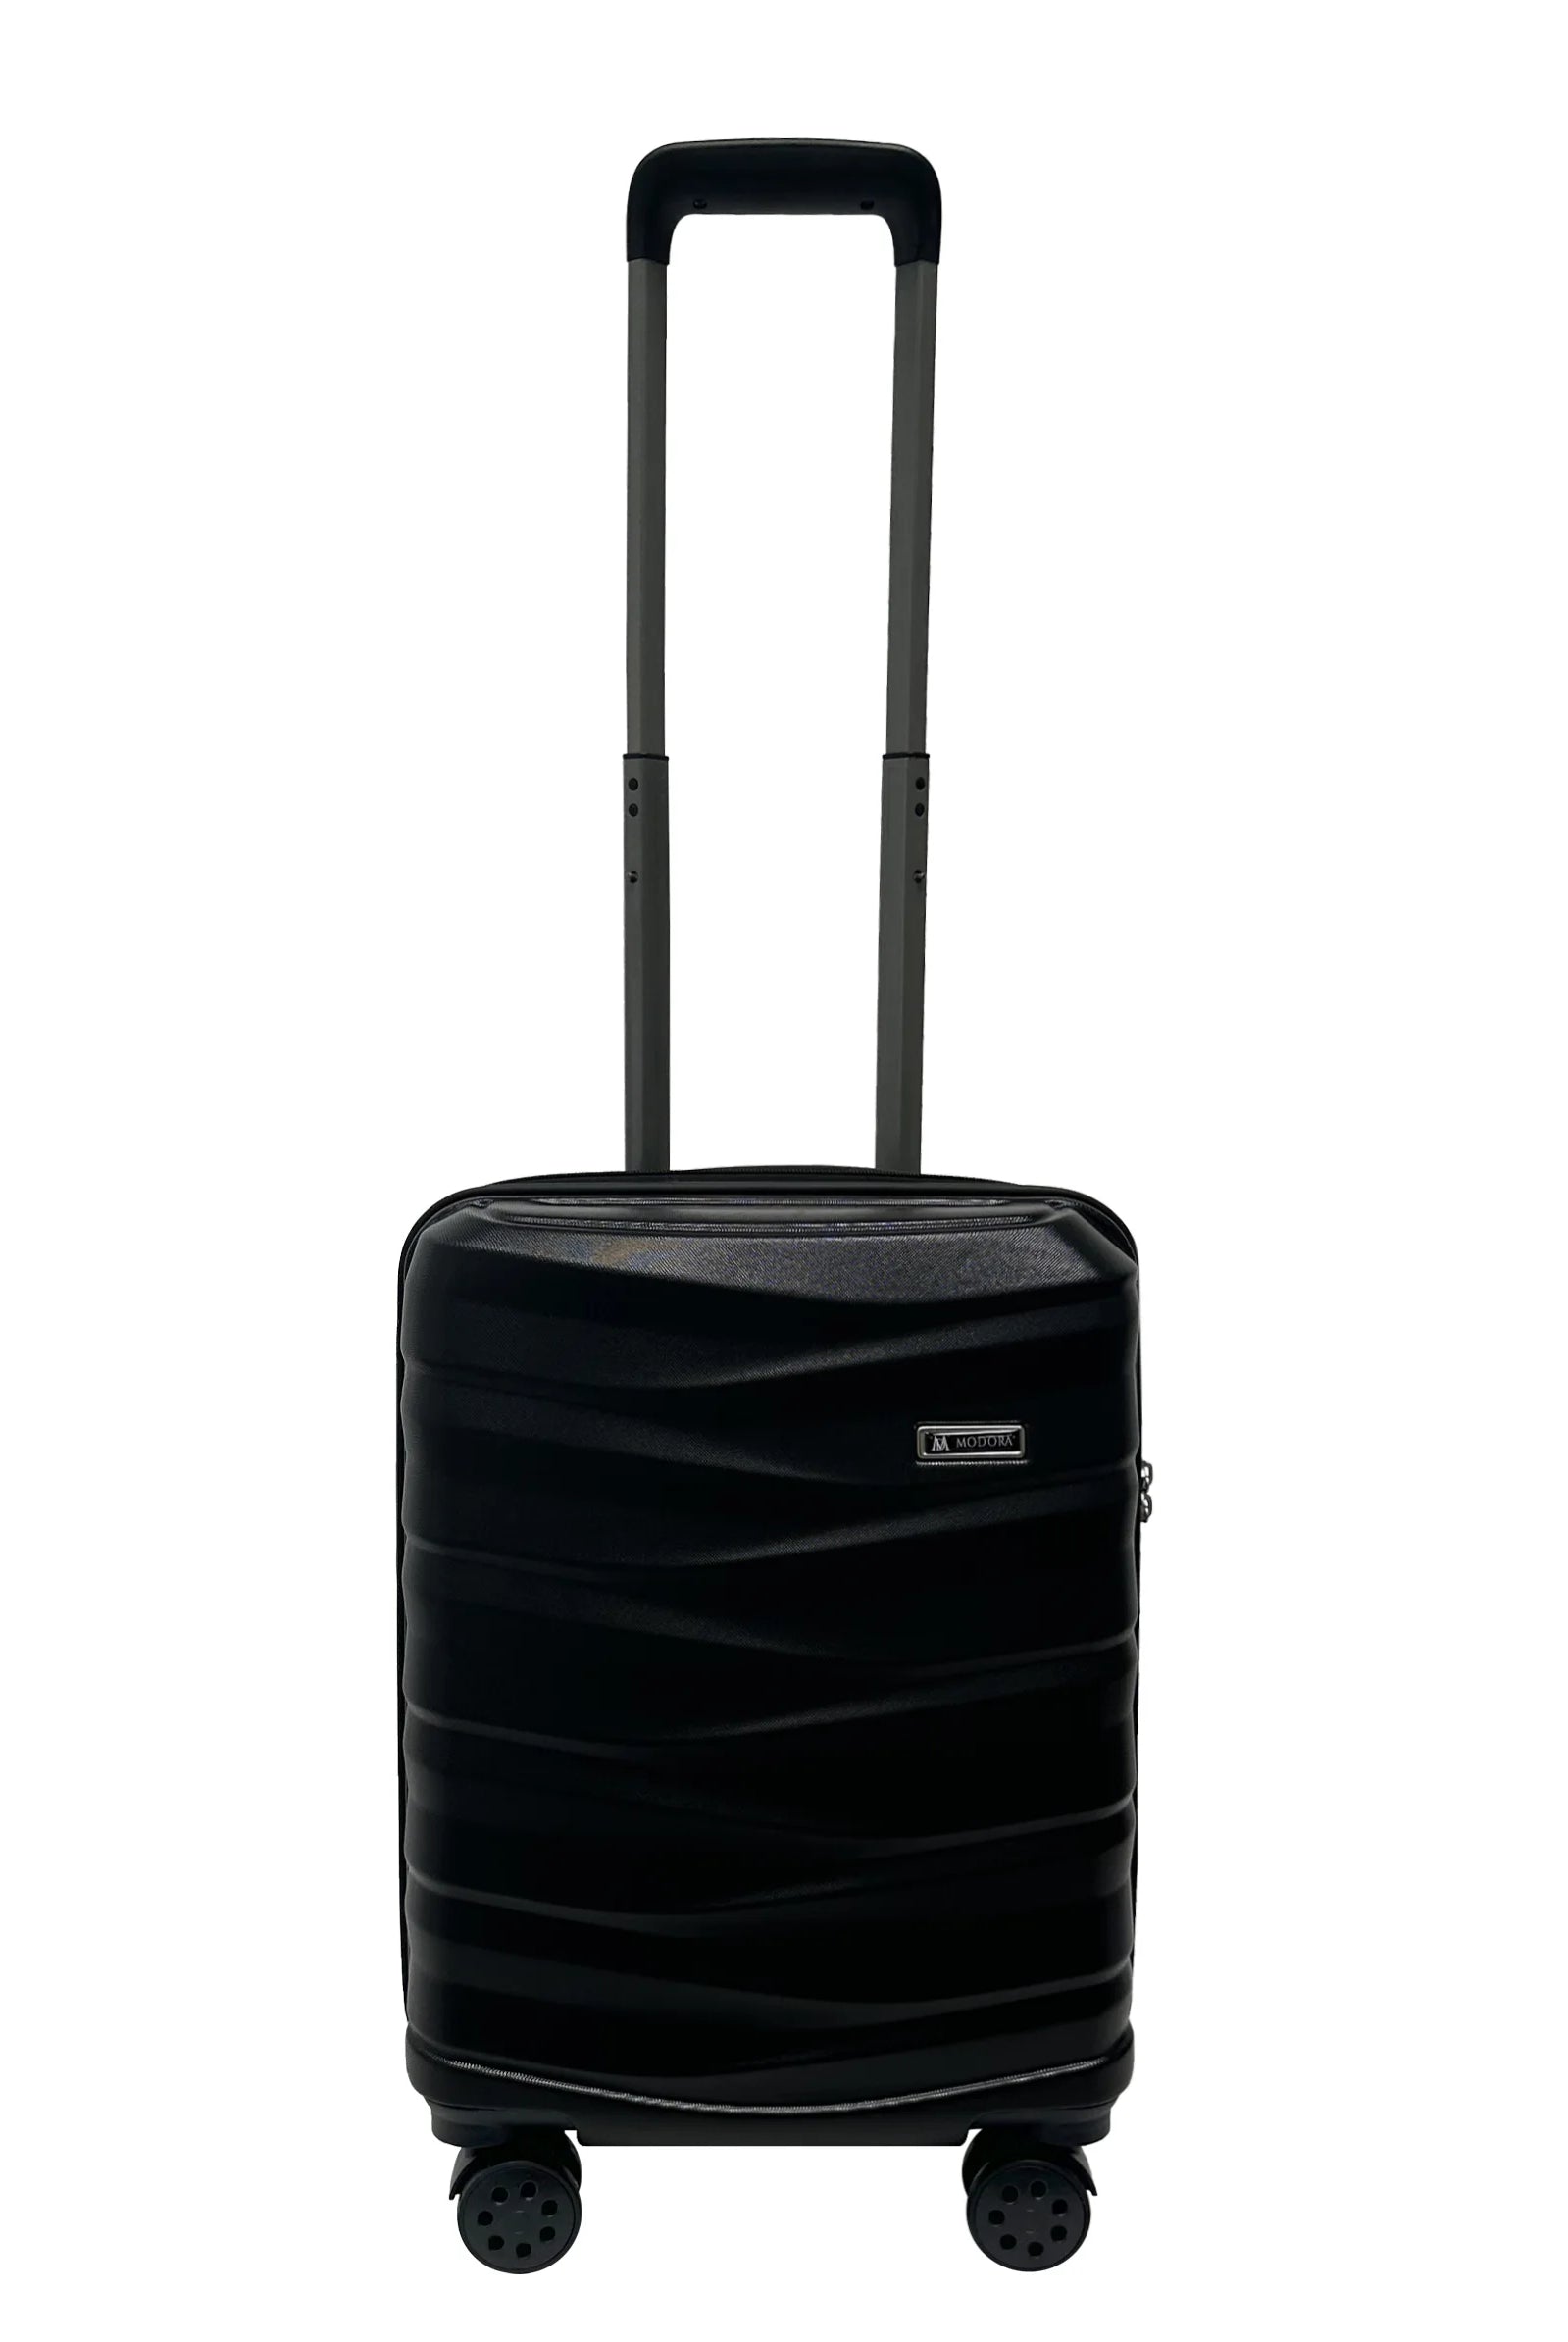 Black carry on suitcase